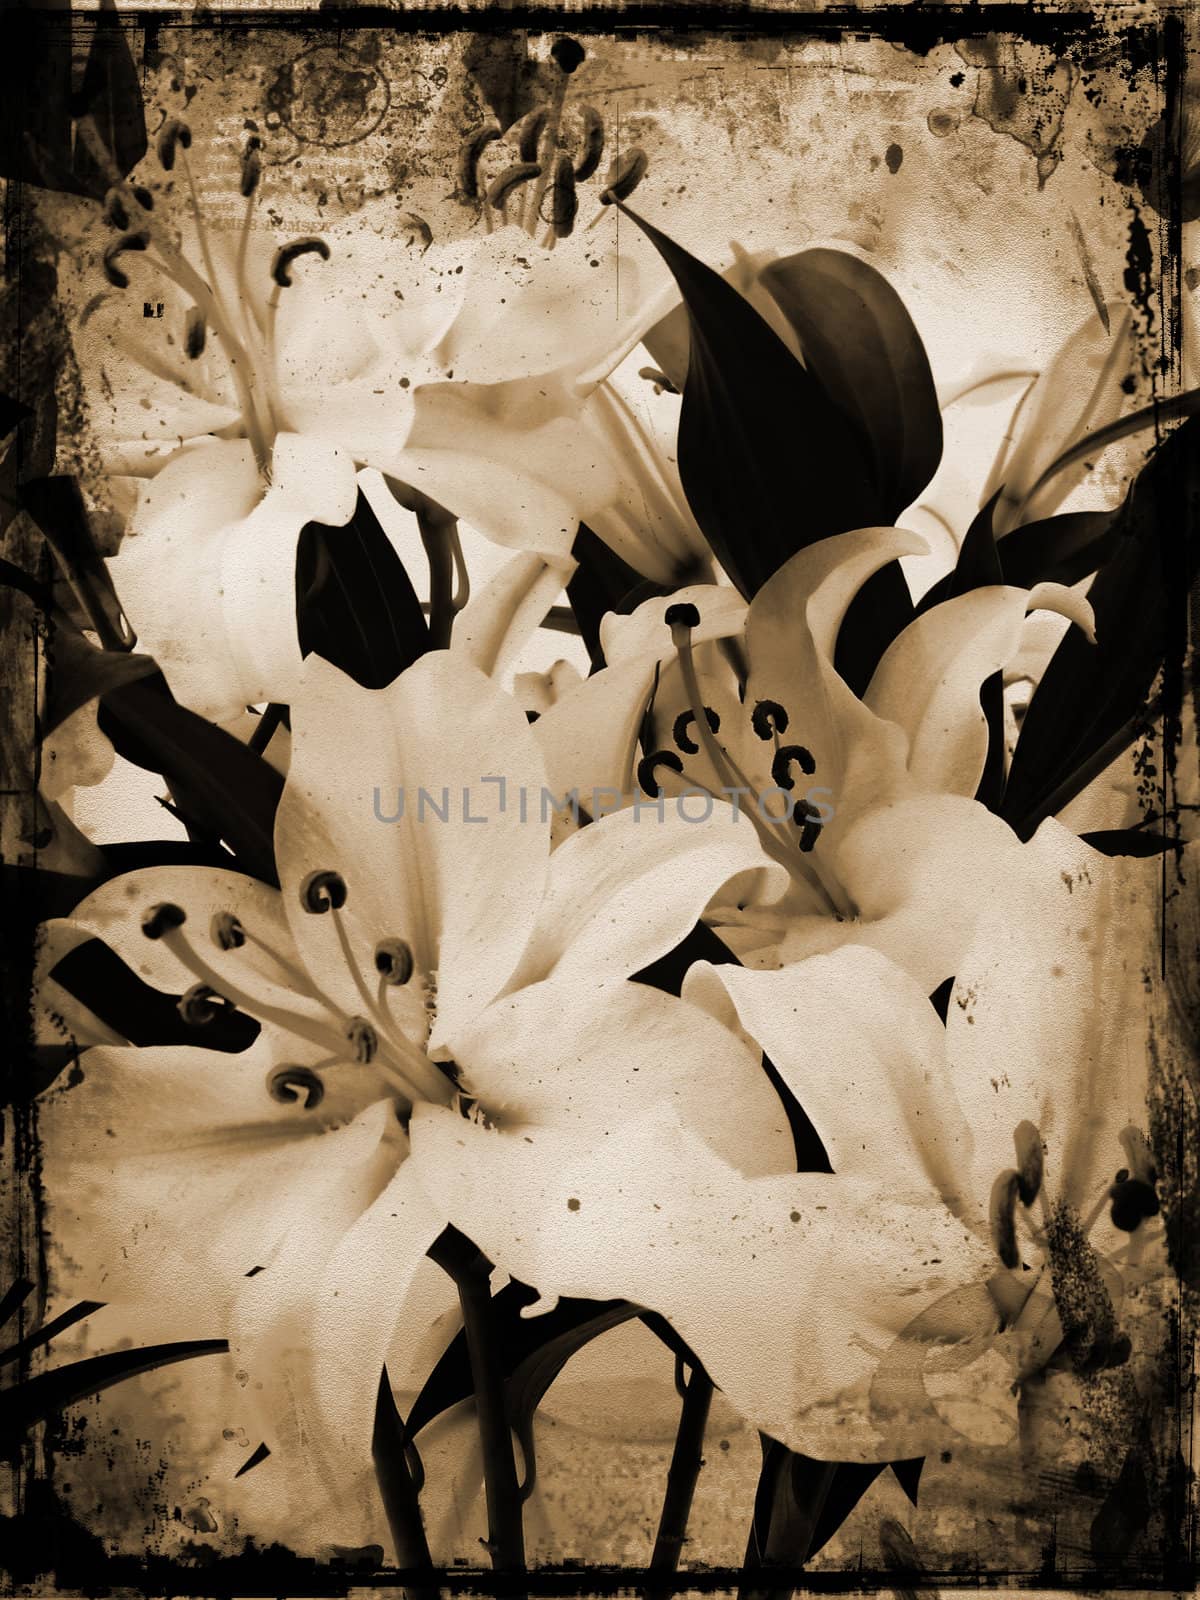 Grunge style image of white lillies